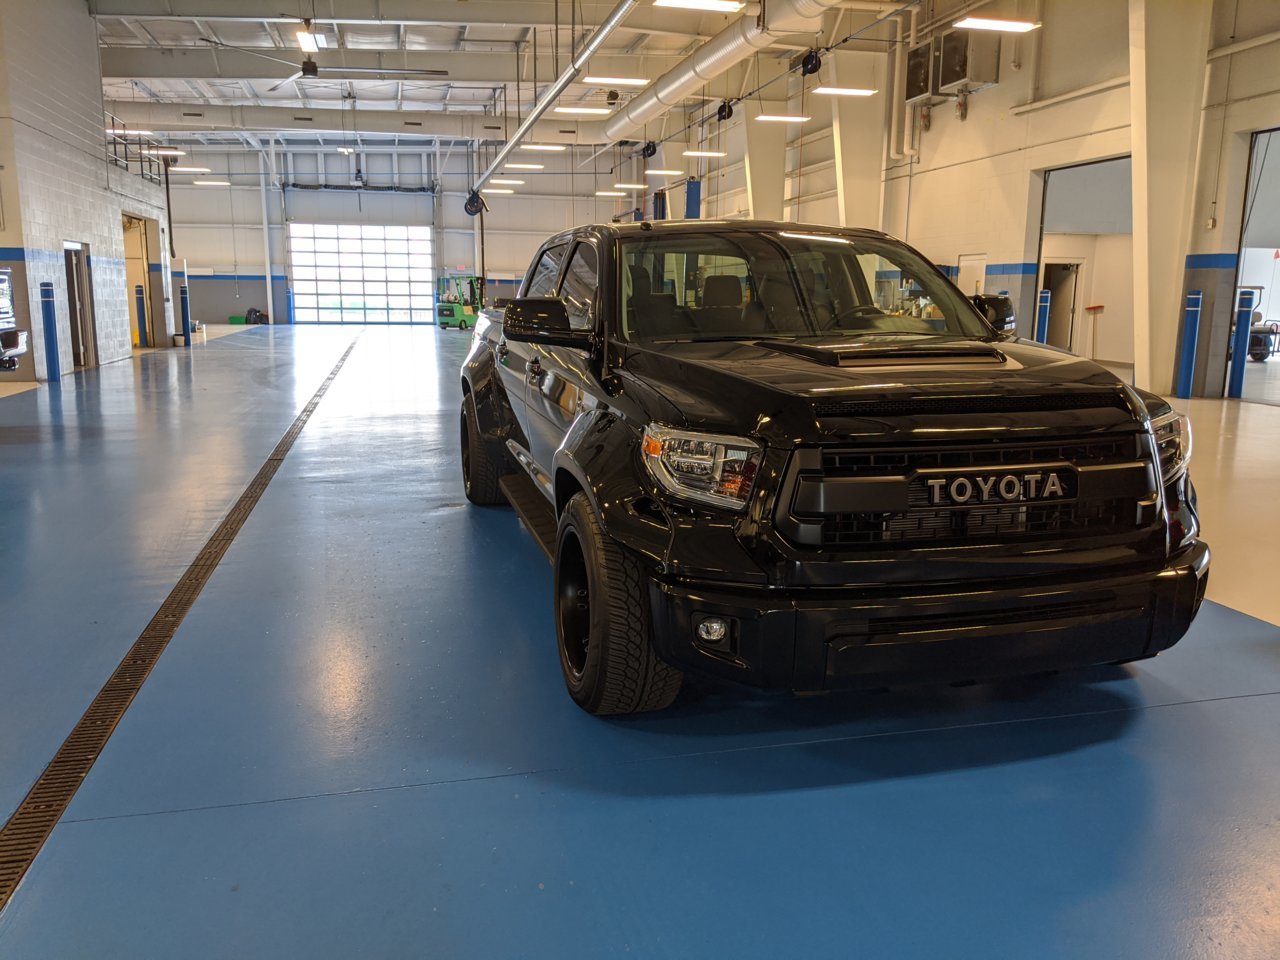 tundra in shop from front.jpg